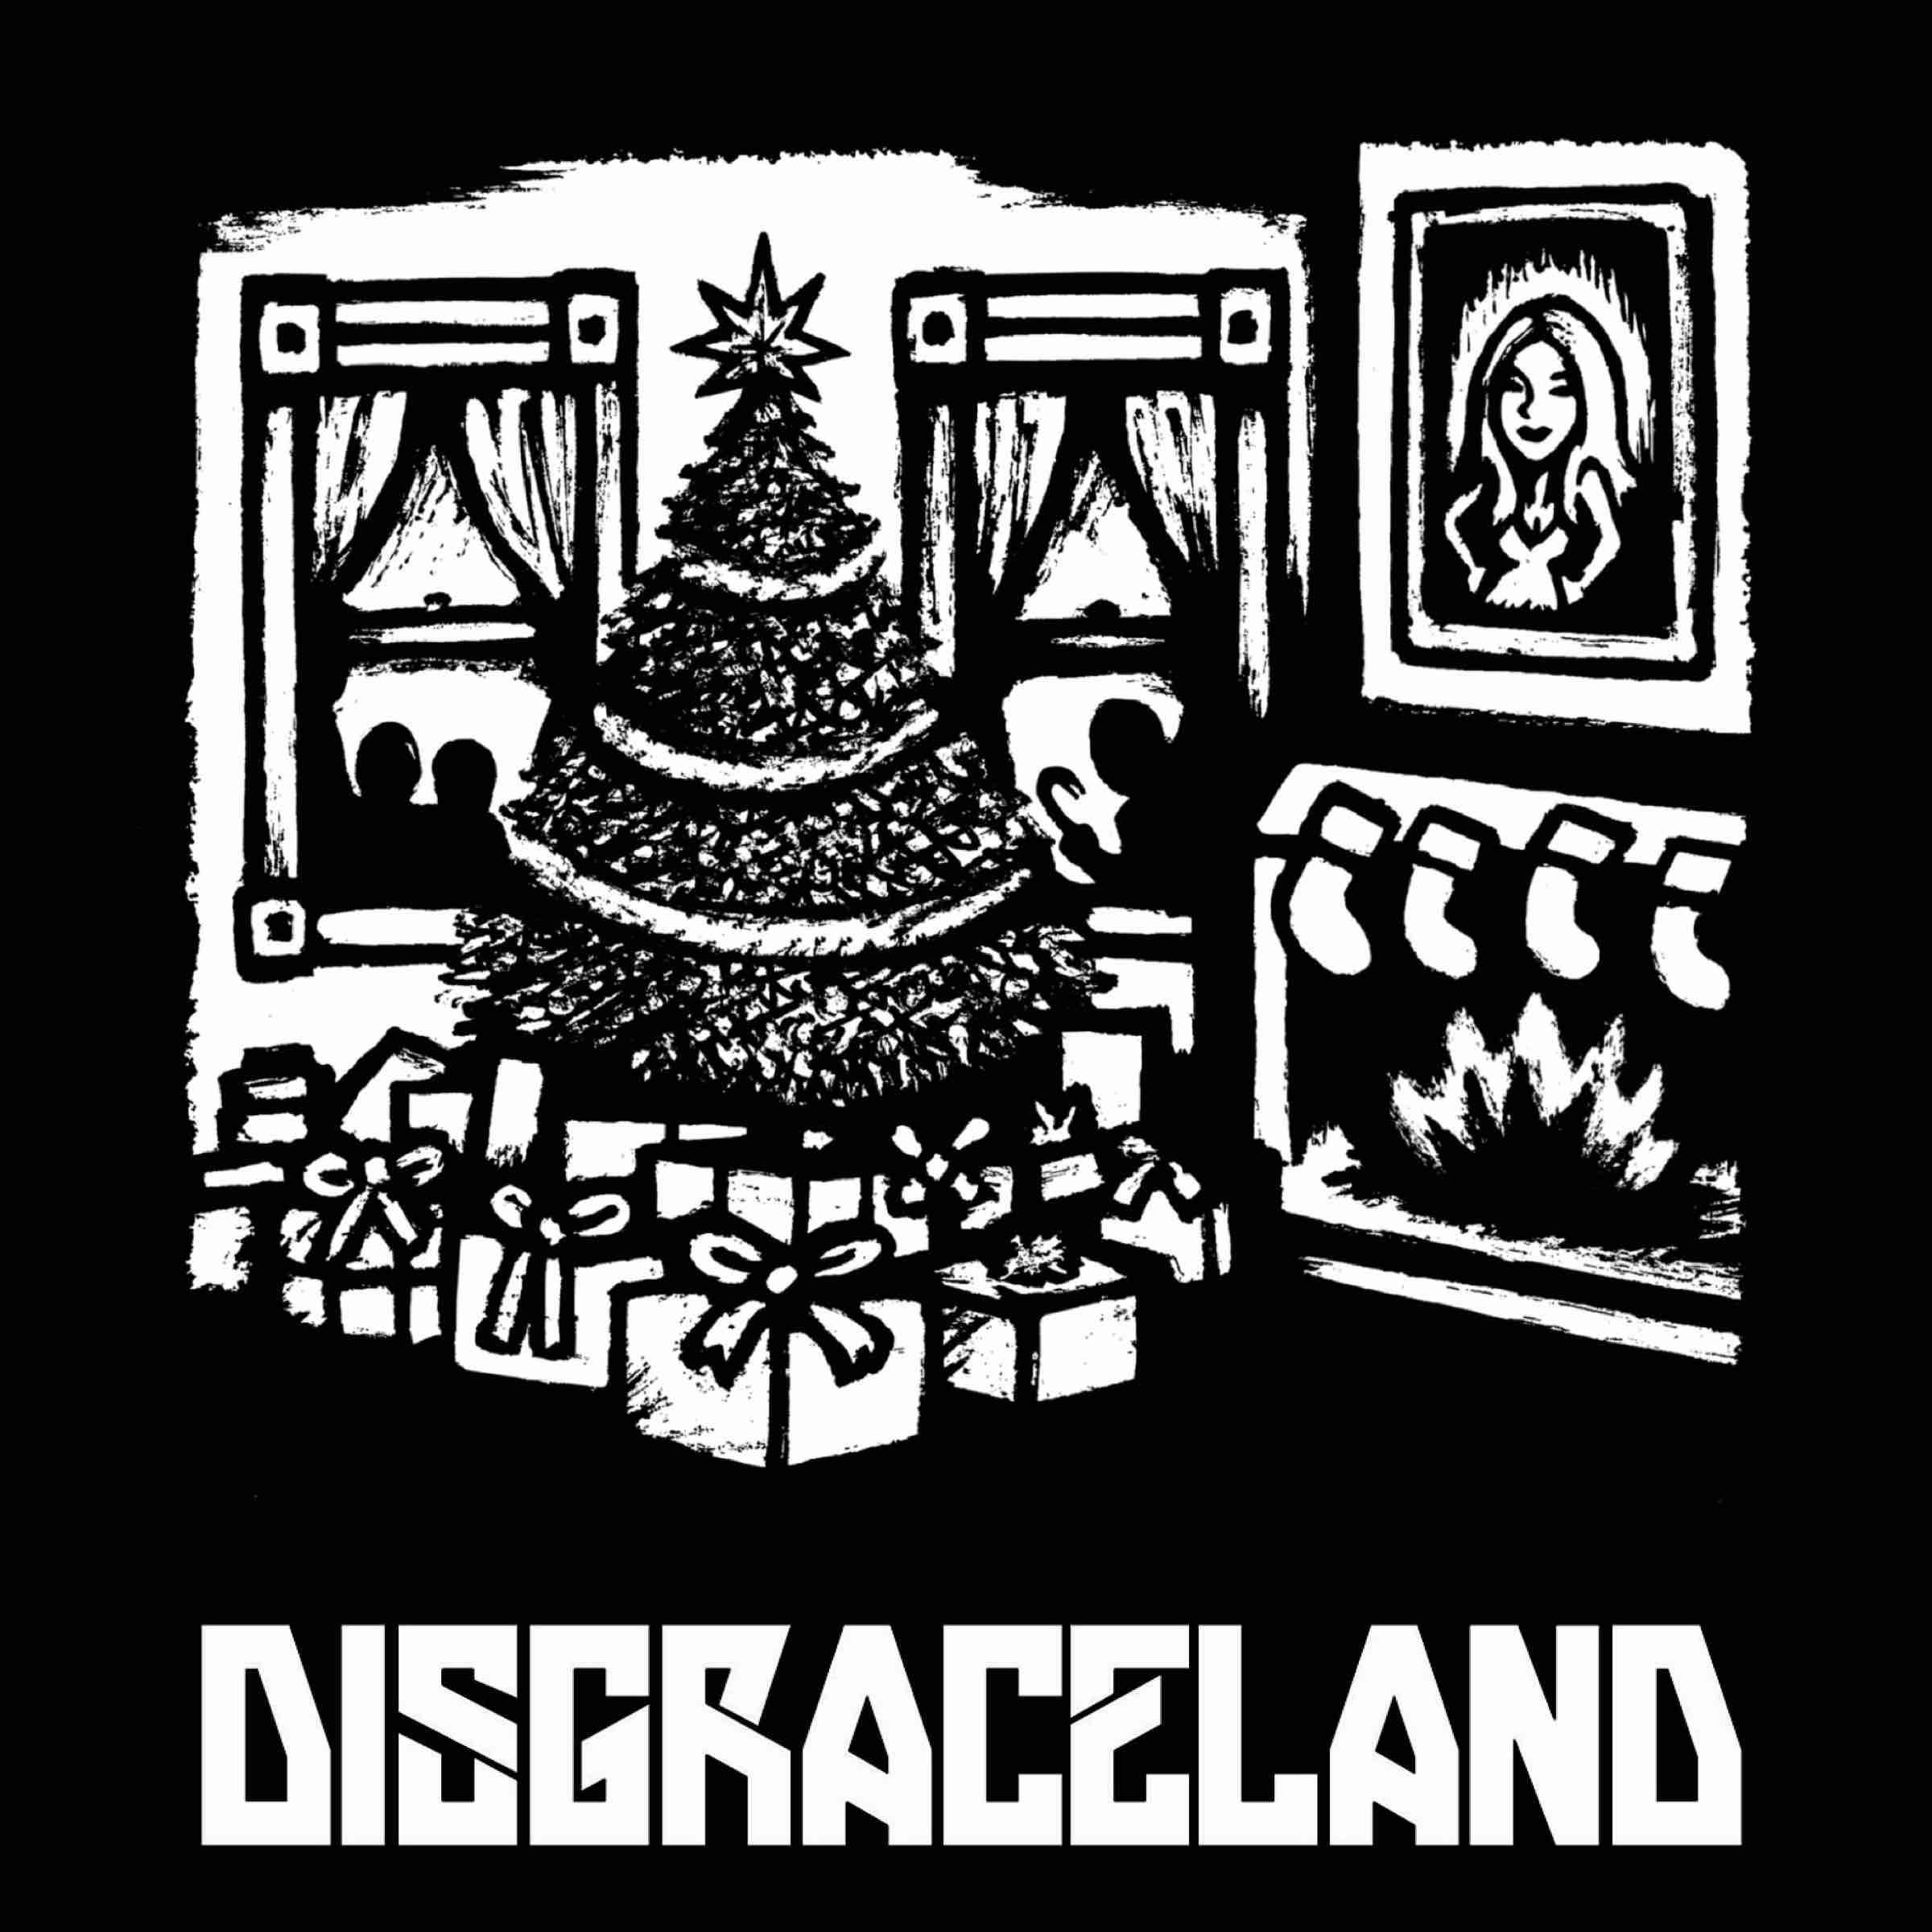 Presenting Disgraceland - Mariah Carey: Armed Guards, Gang Burglaries, and the True Meaning of Christmas